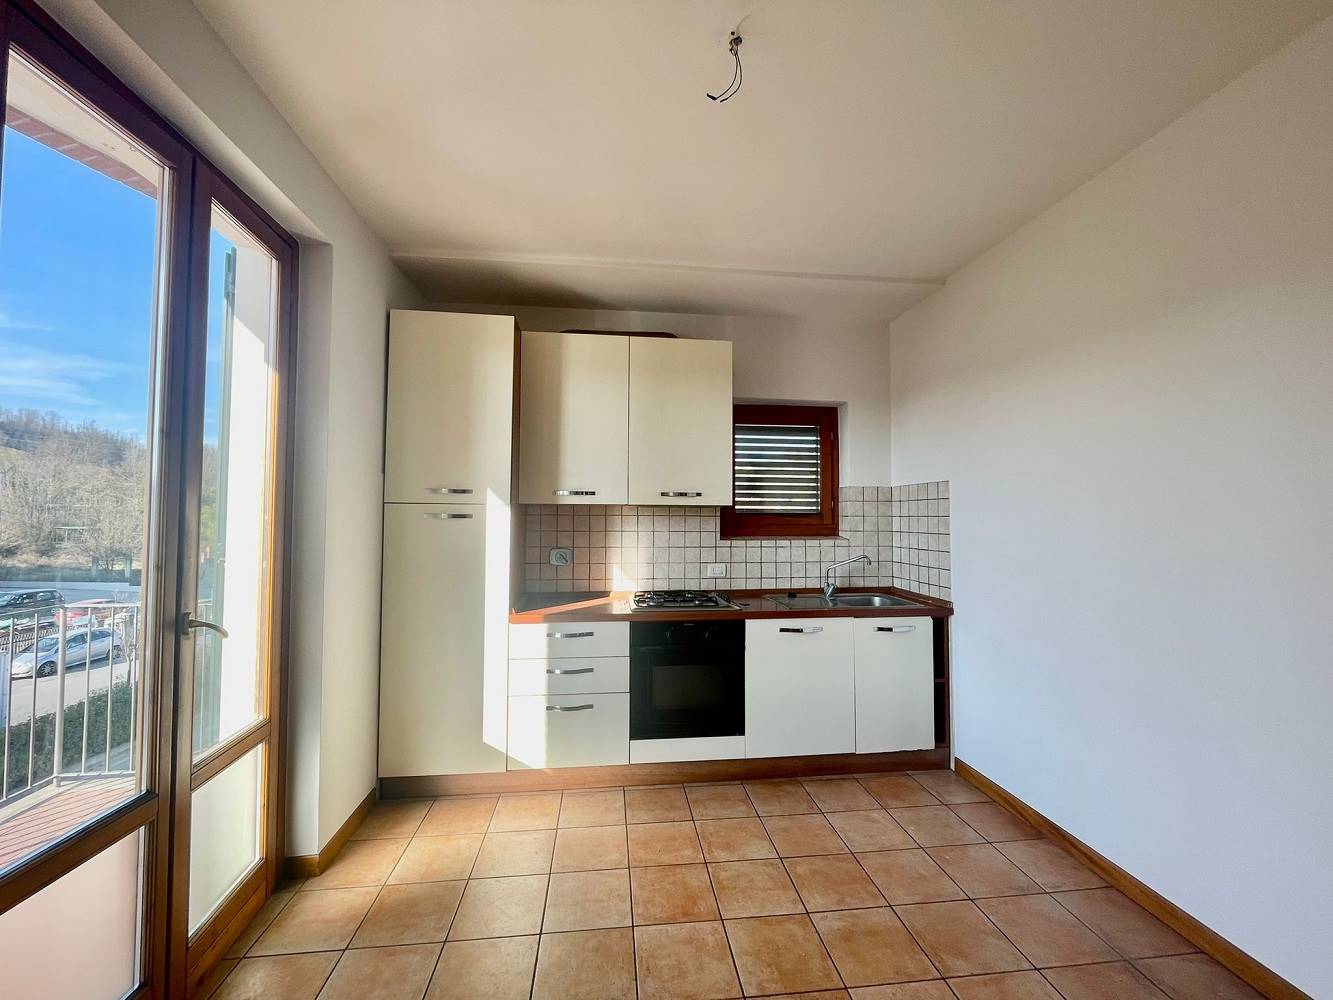 FIGLINE E INCISA VALDARNO, Apartment for rent of 60 Sq. mt., Good condition, Heating Individual heating system, Energetic class: G, placed at 2° on 2,